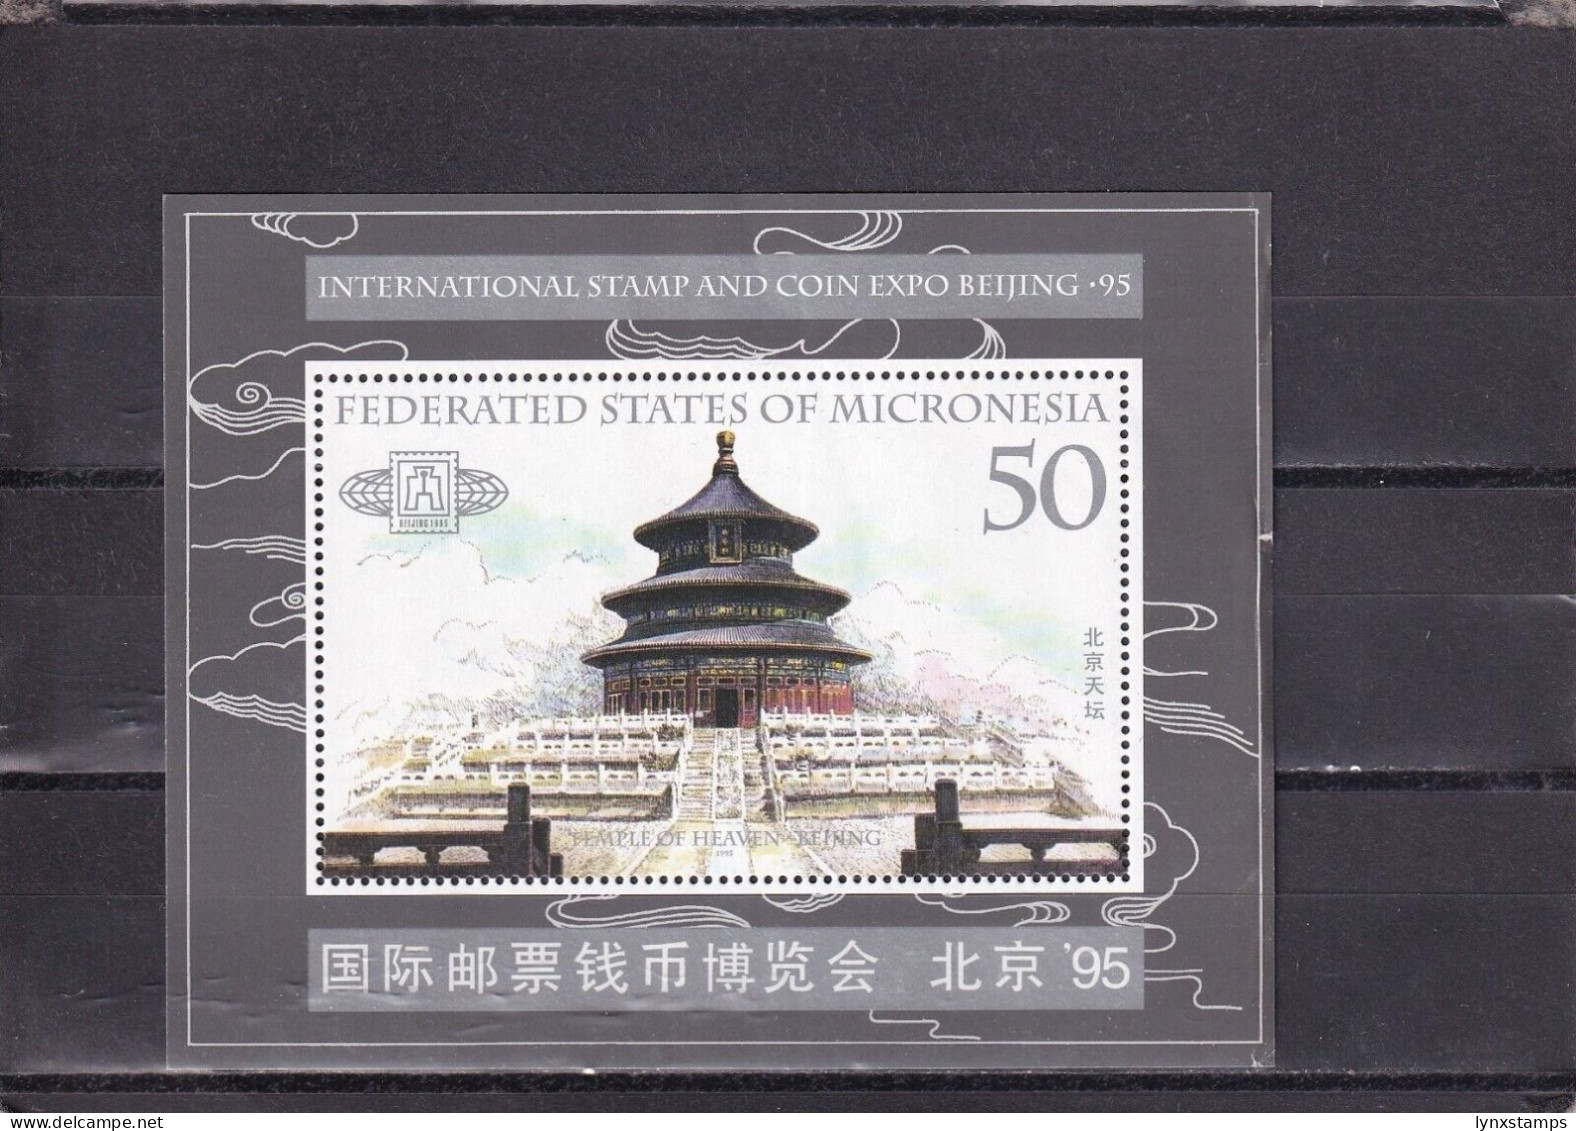 SA04 Micronesia 1995 Inter Stamp And Coin Exhibition Beijing '95 Minisheet - Mikronesien